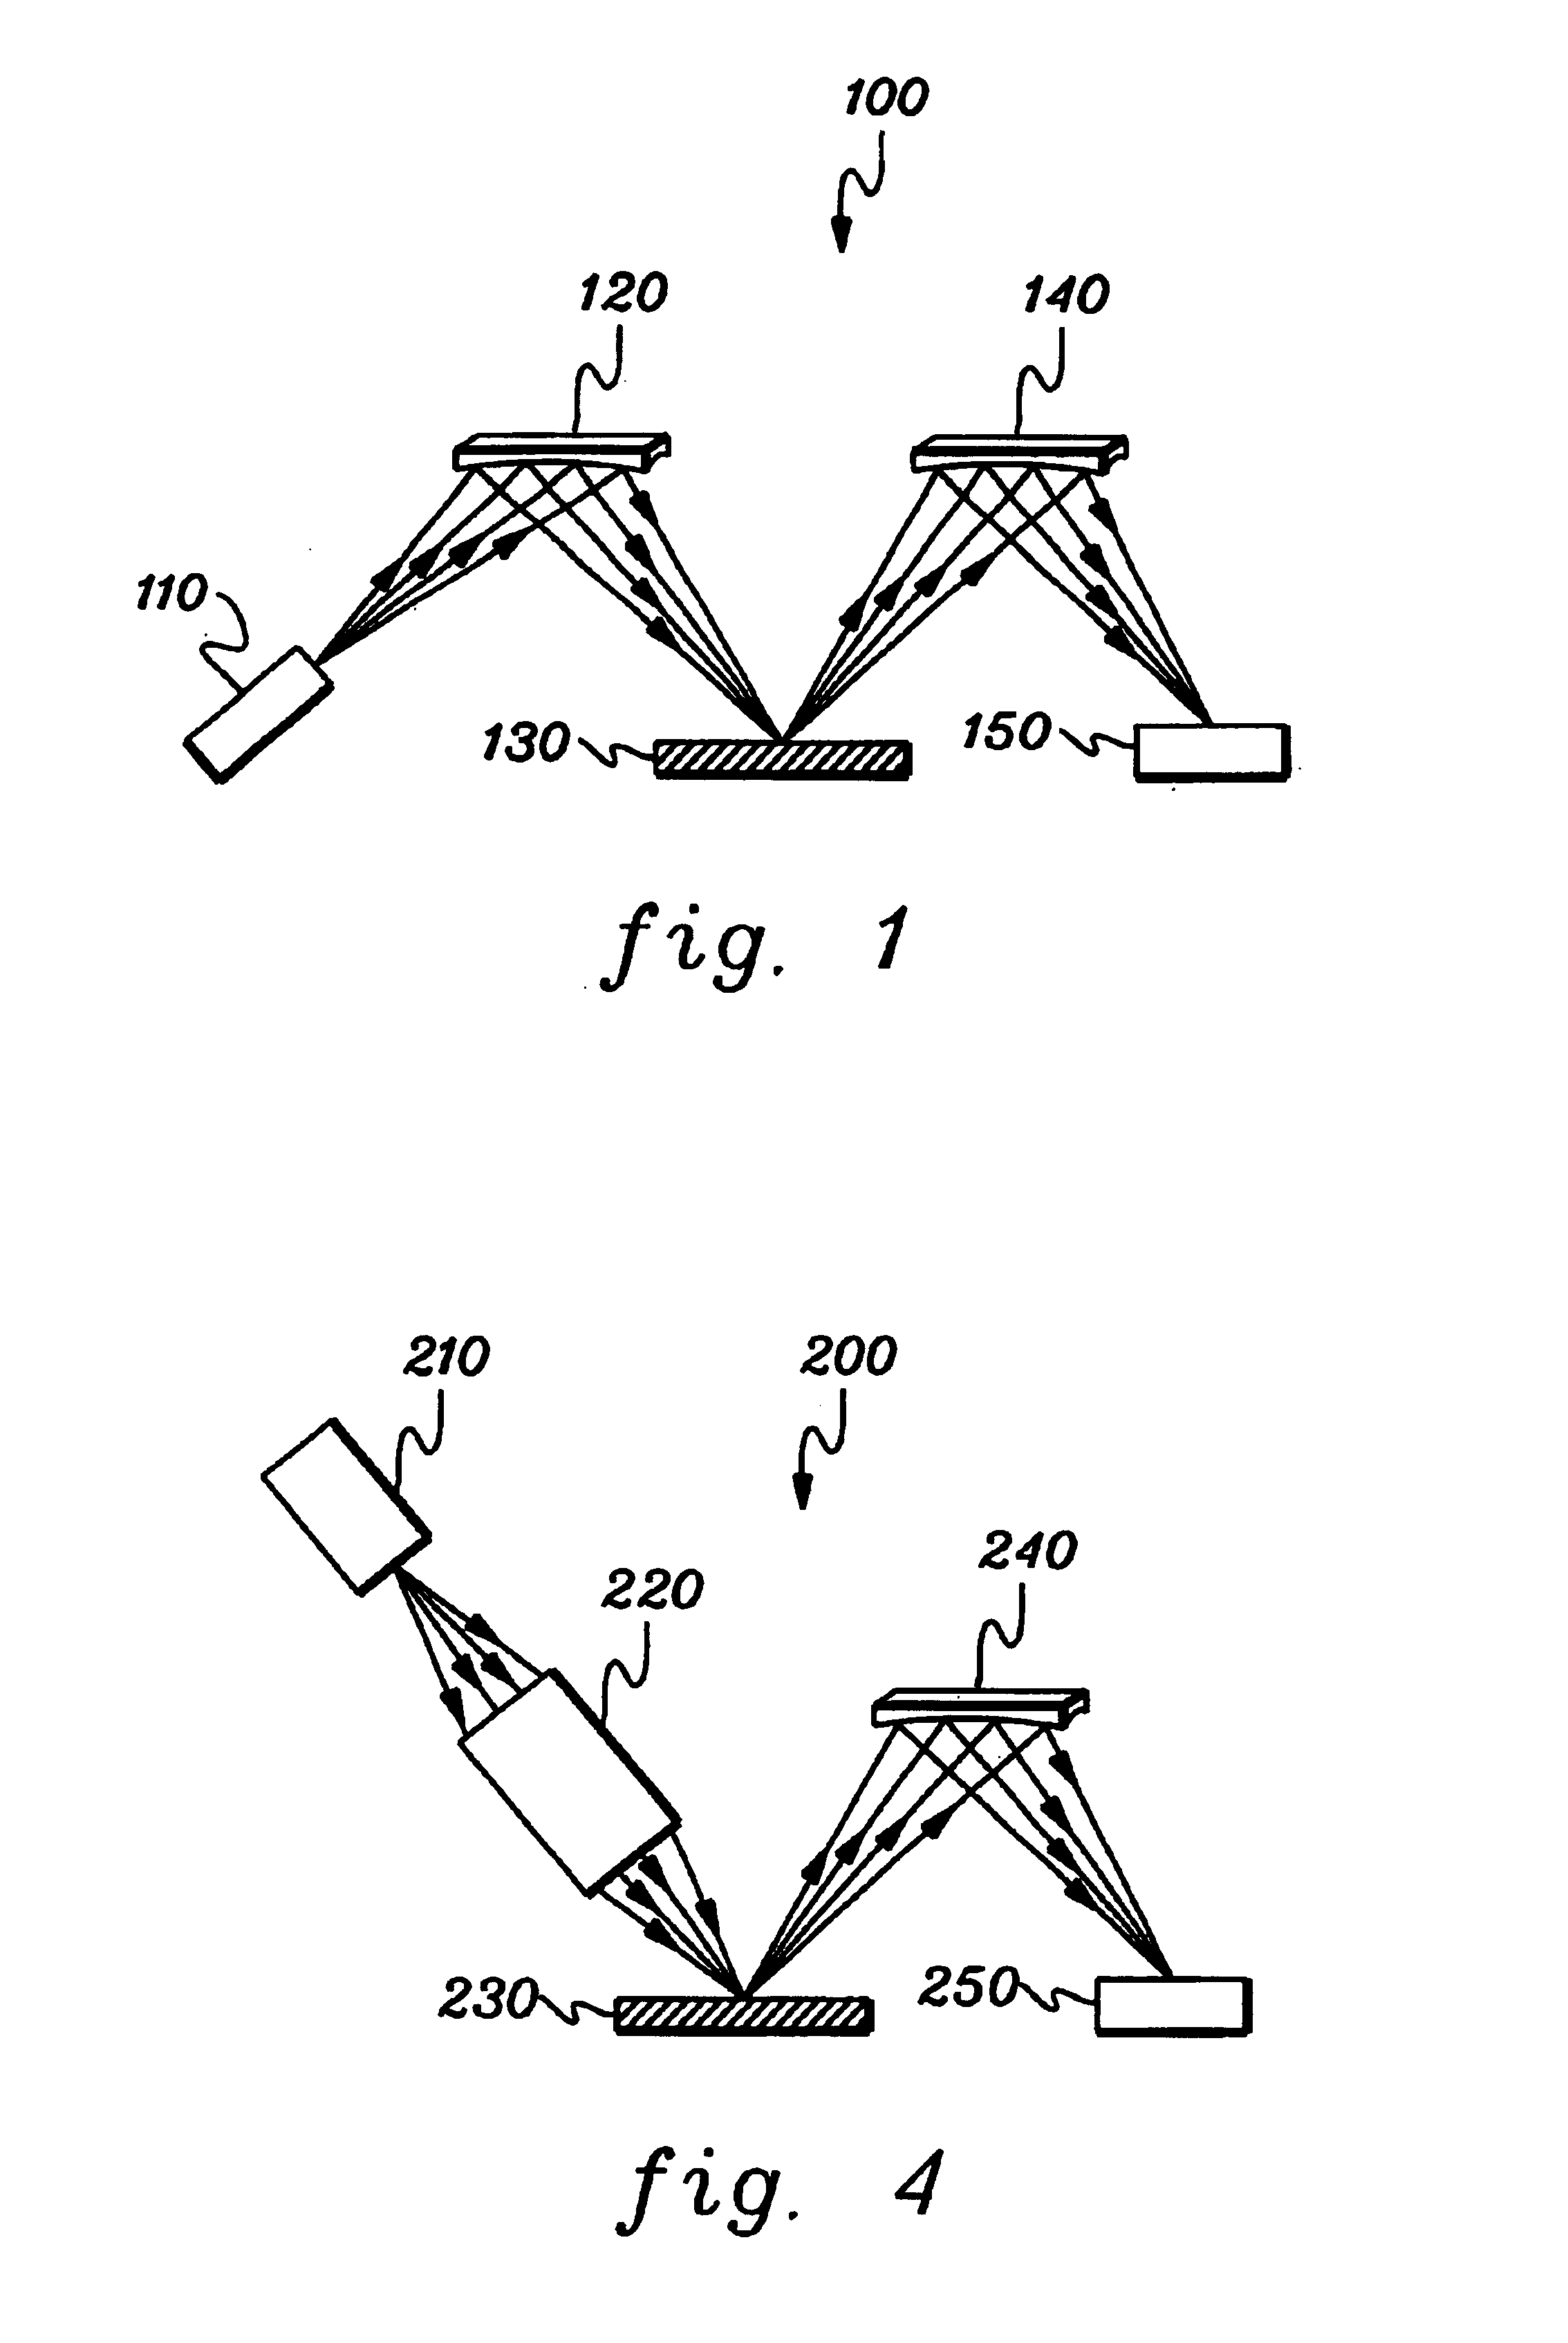 Wavelength dispersive XRF system using focusing optic for excitation and a focusing monochromator for collection